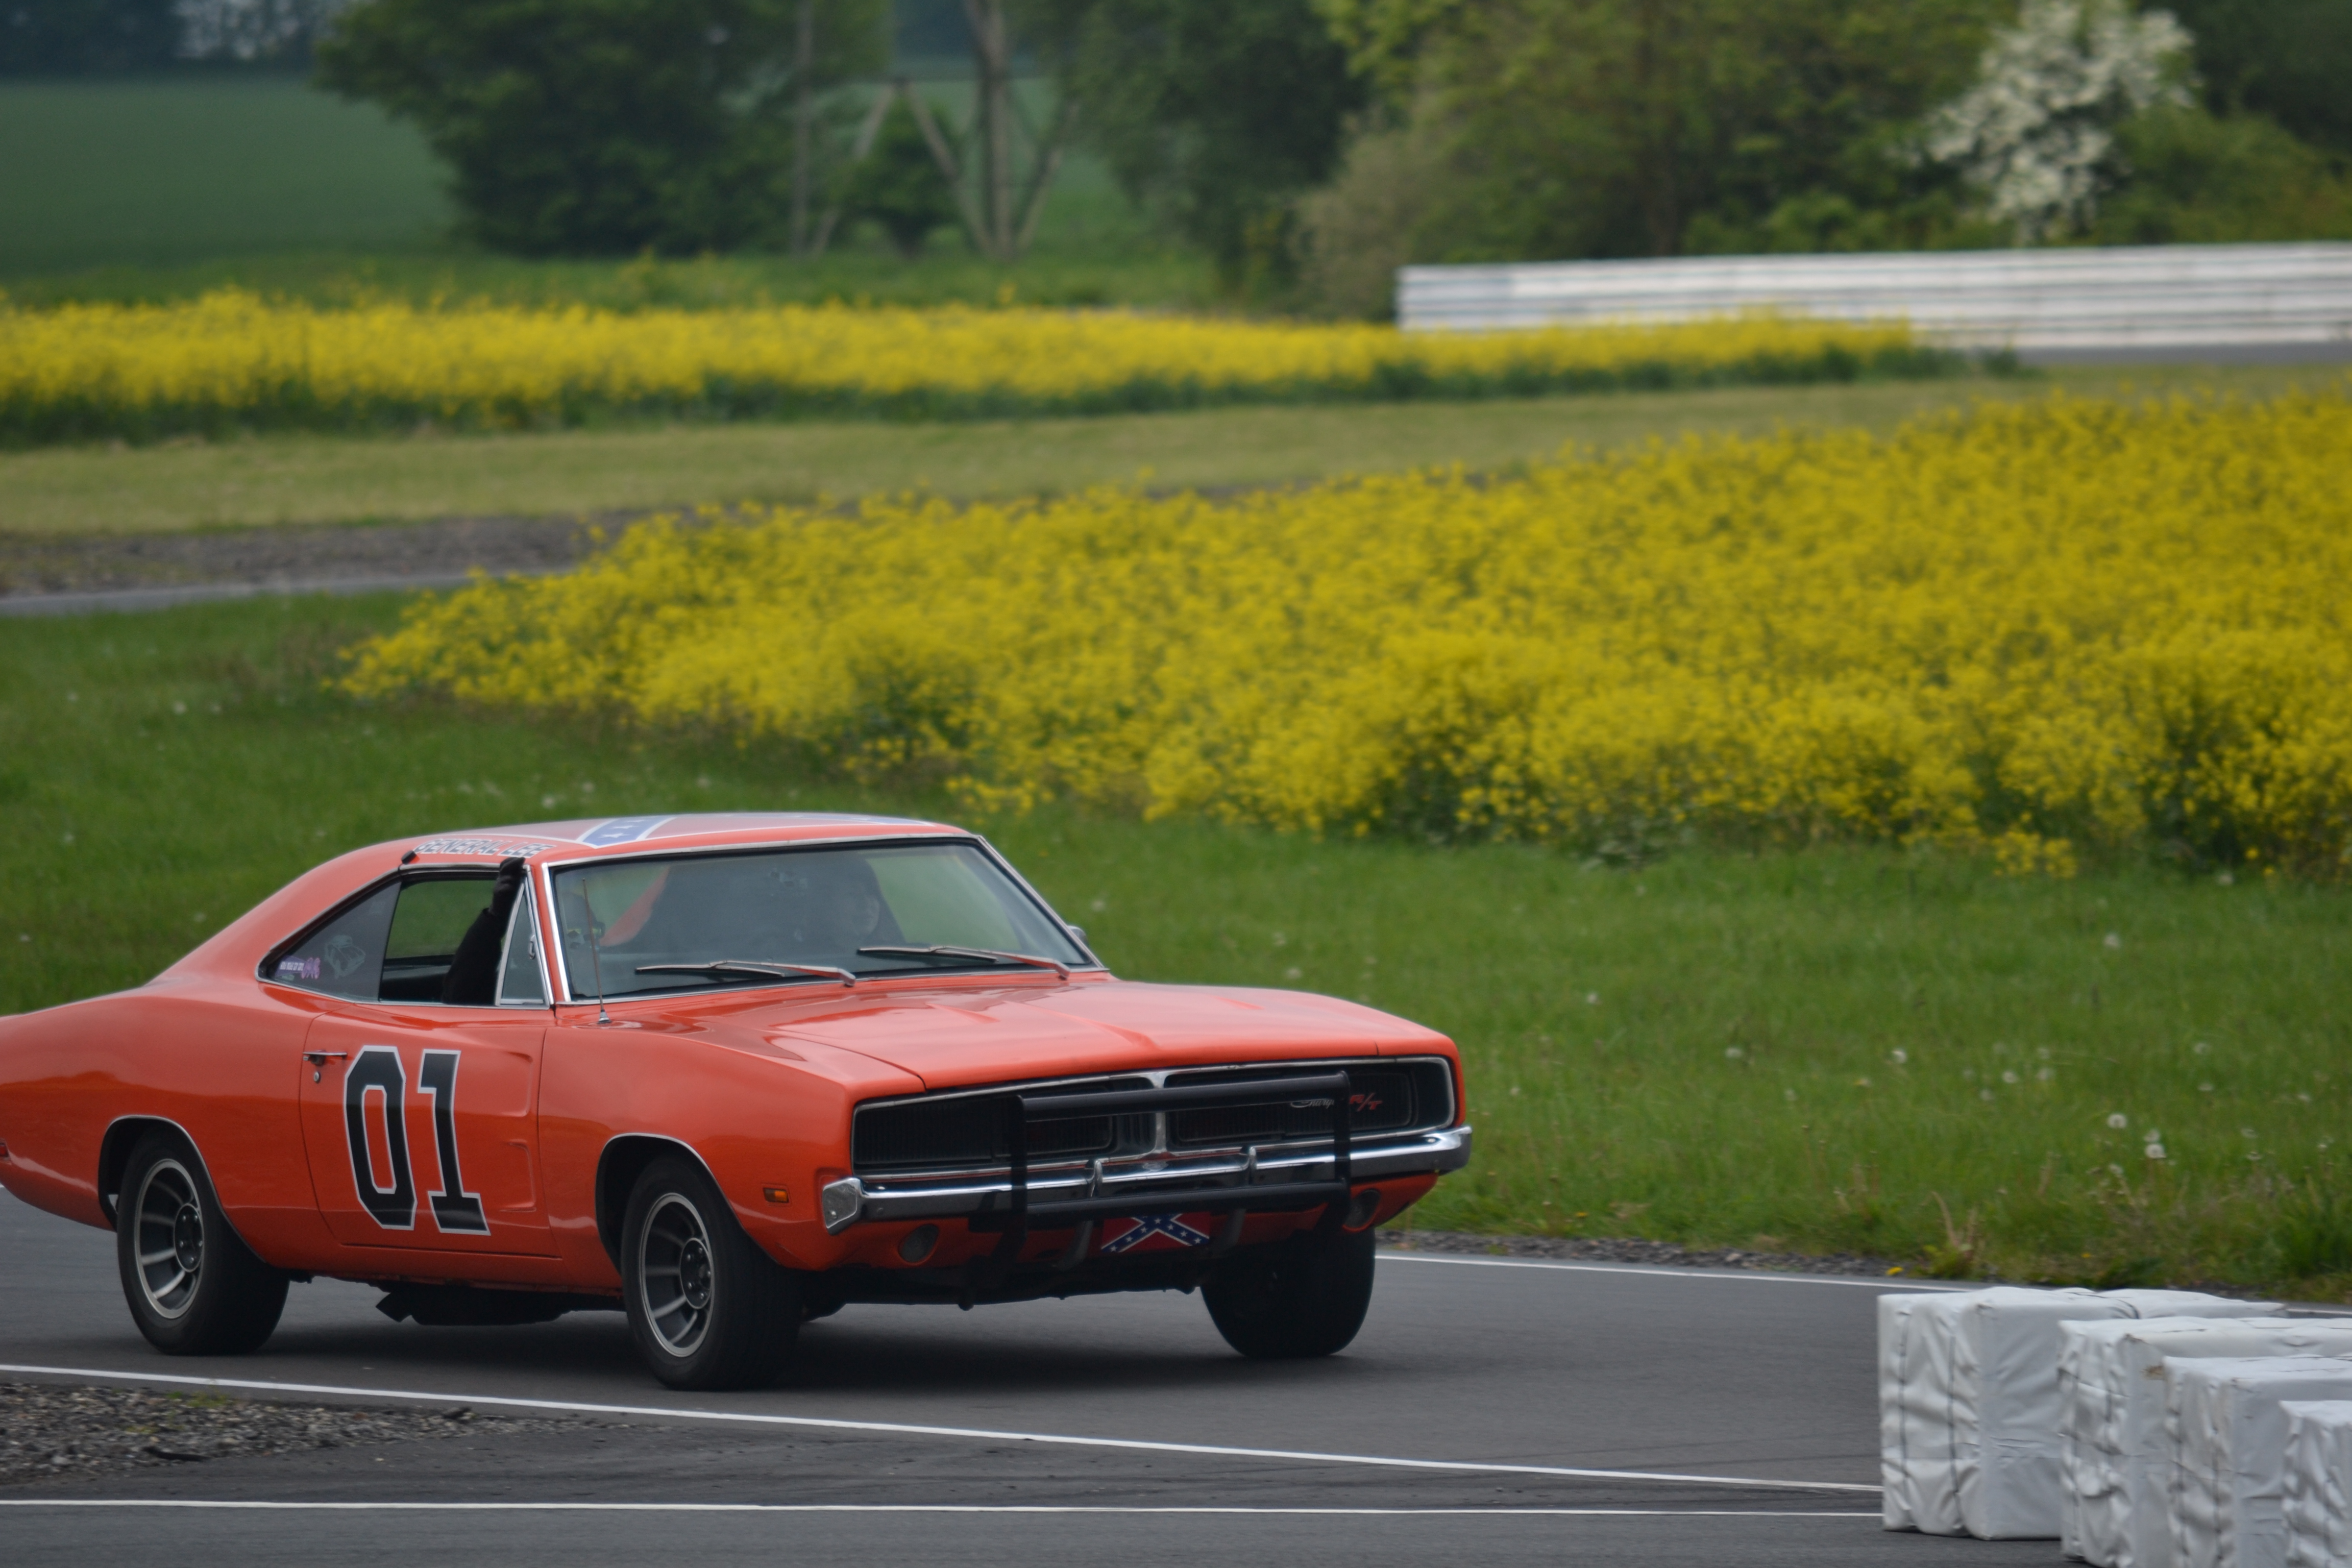 Driving the General Lee | beats the office